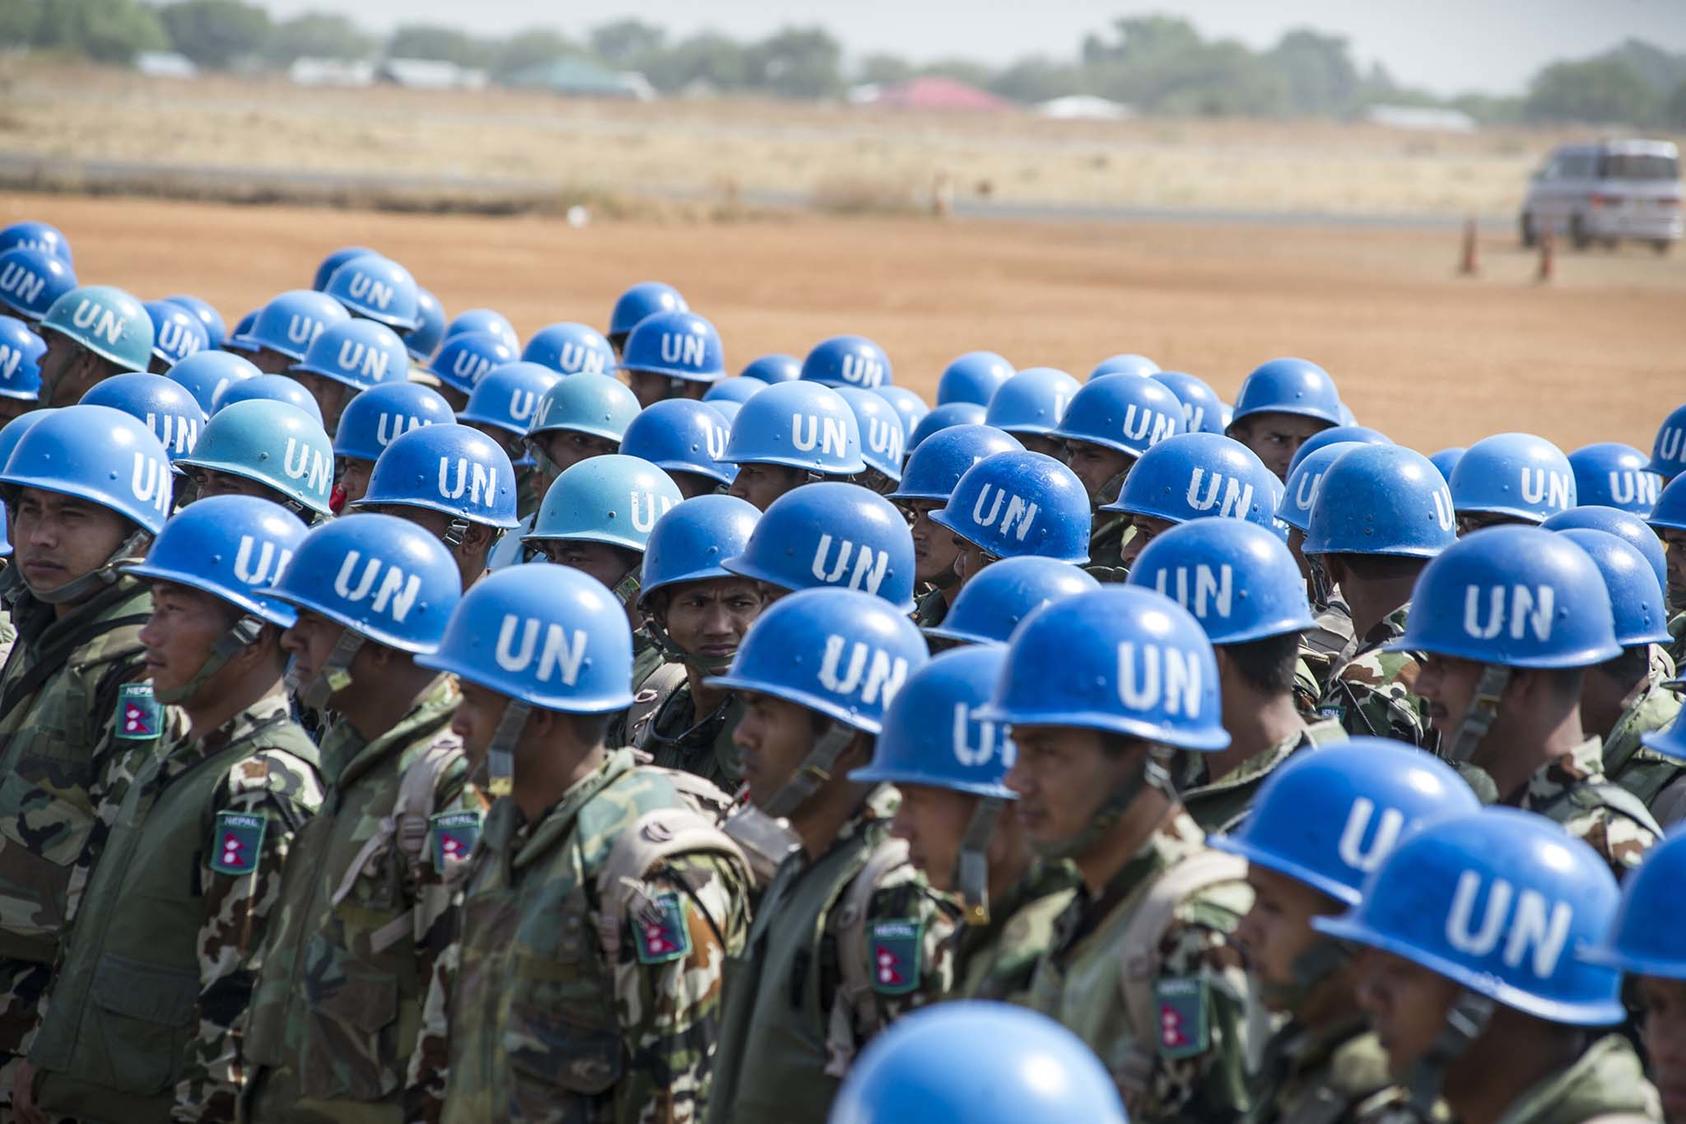 History Of United Nations Peacekeeping Operations: UN Peacekeeping